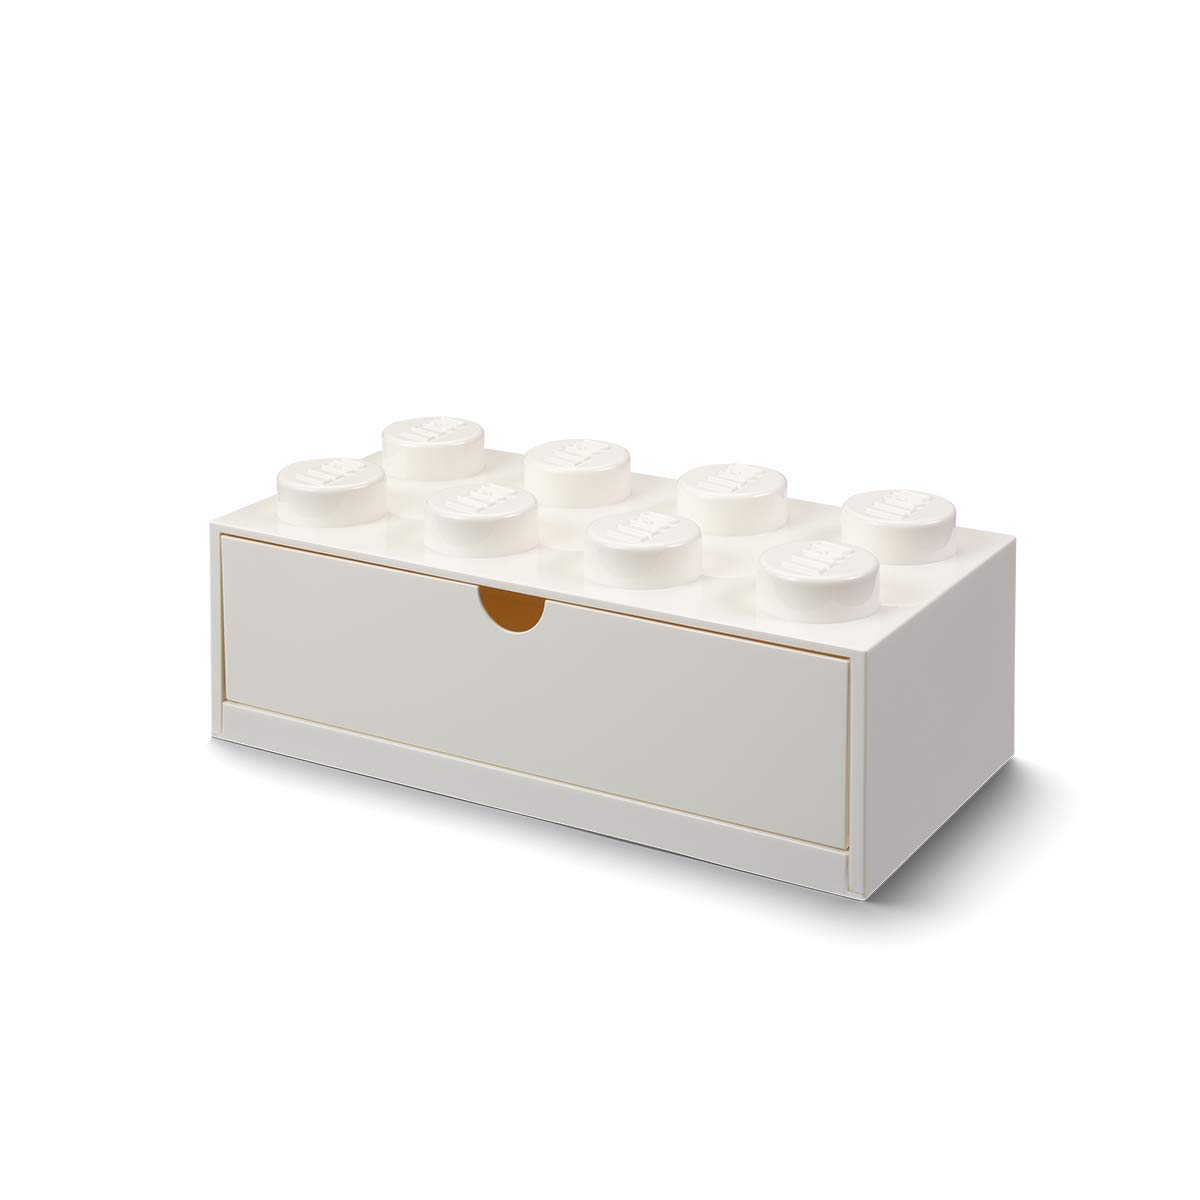 Lego 40211735 Desk Drawer 8 Buttons White